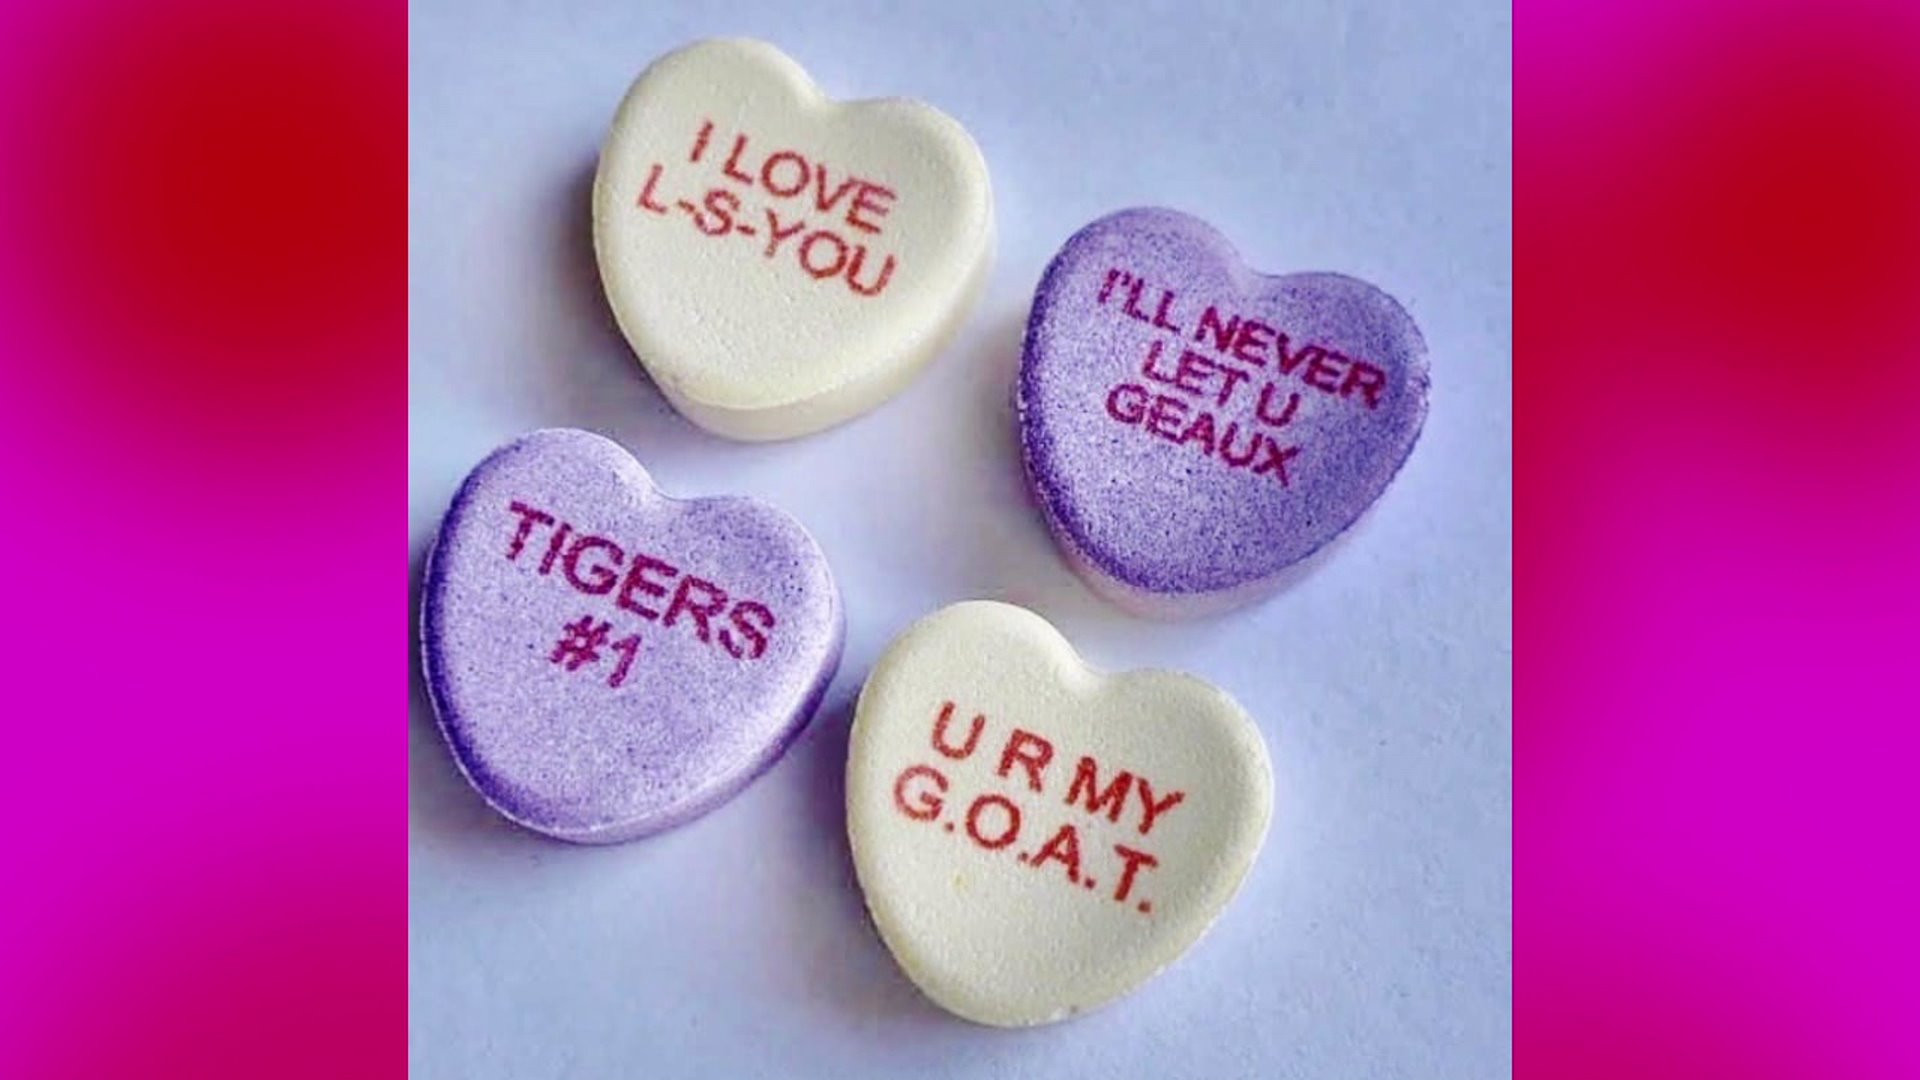 Valentines Day Candy Hearts Sayings
 NOLA Candy Hearts with sweet sayings for Valentine’s Day